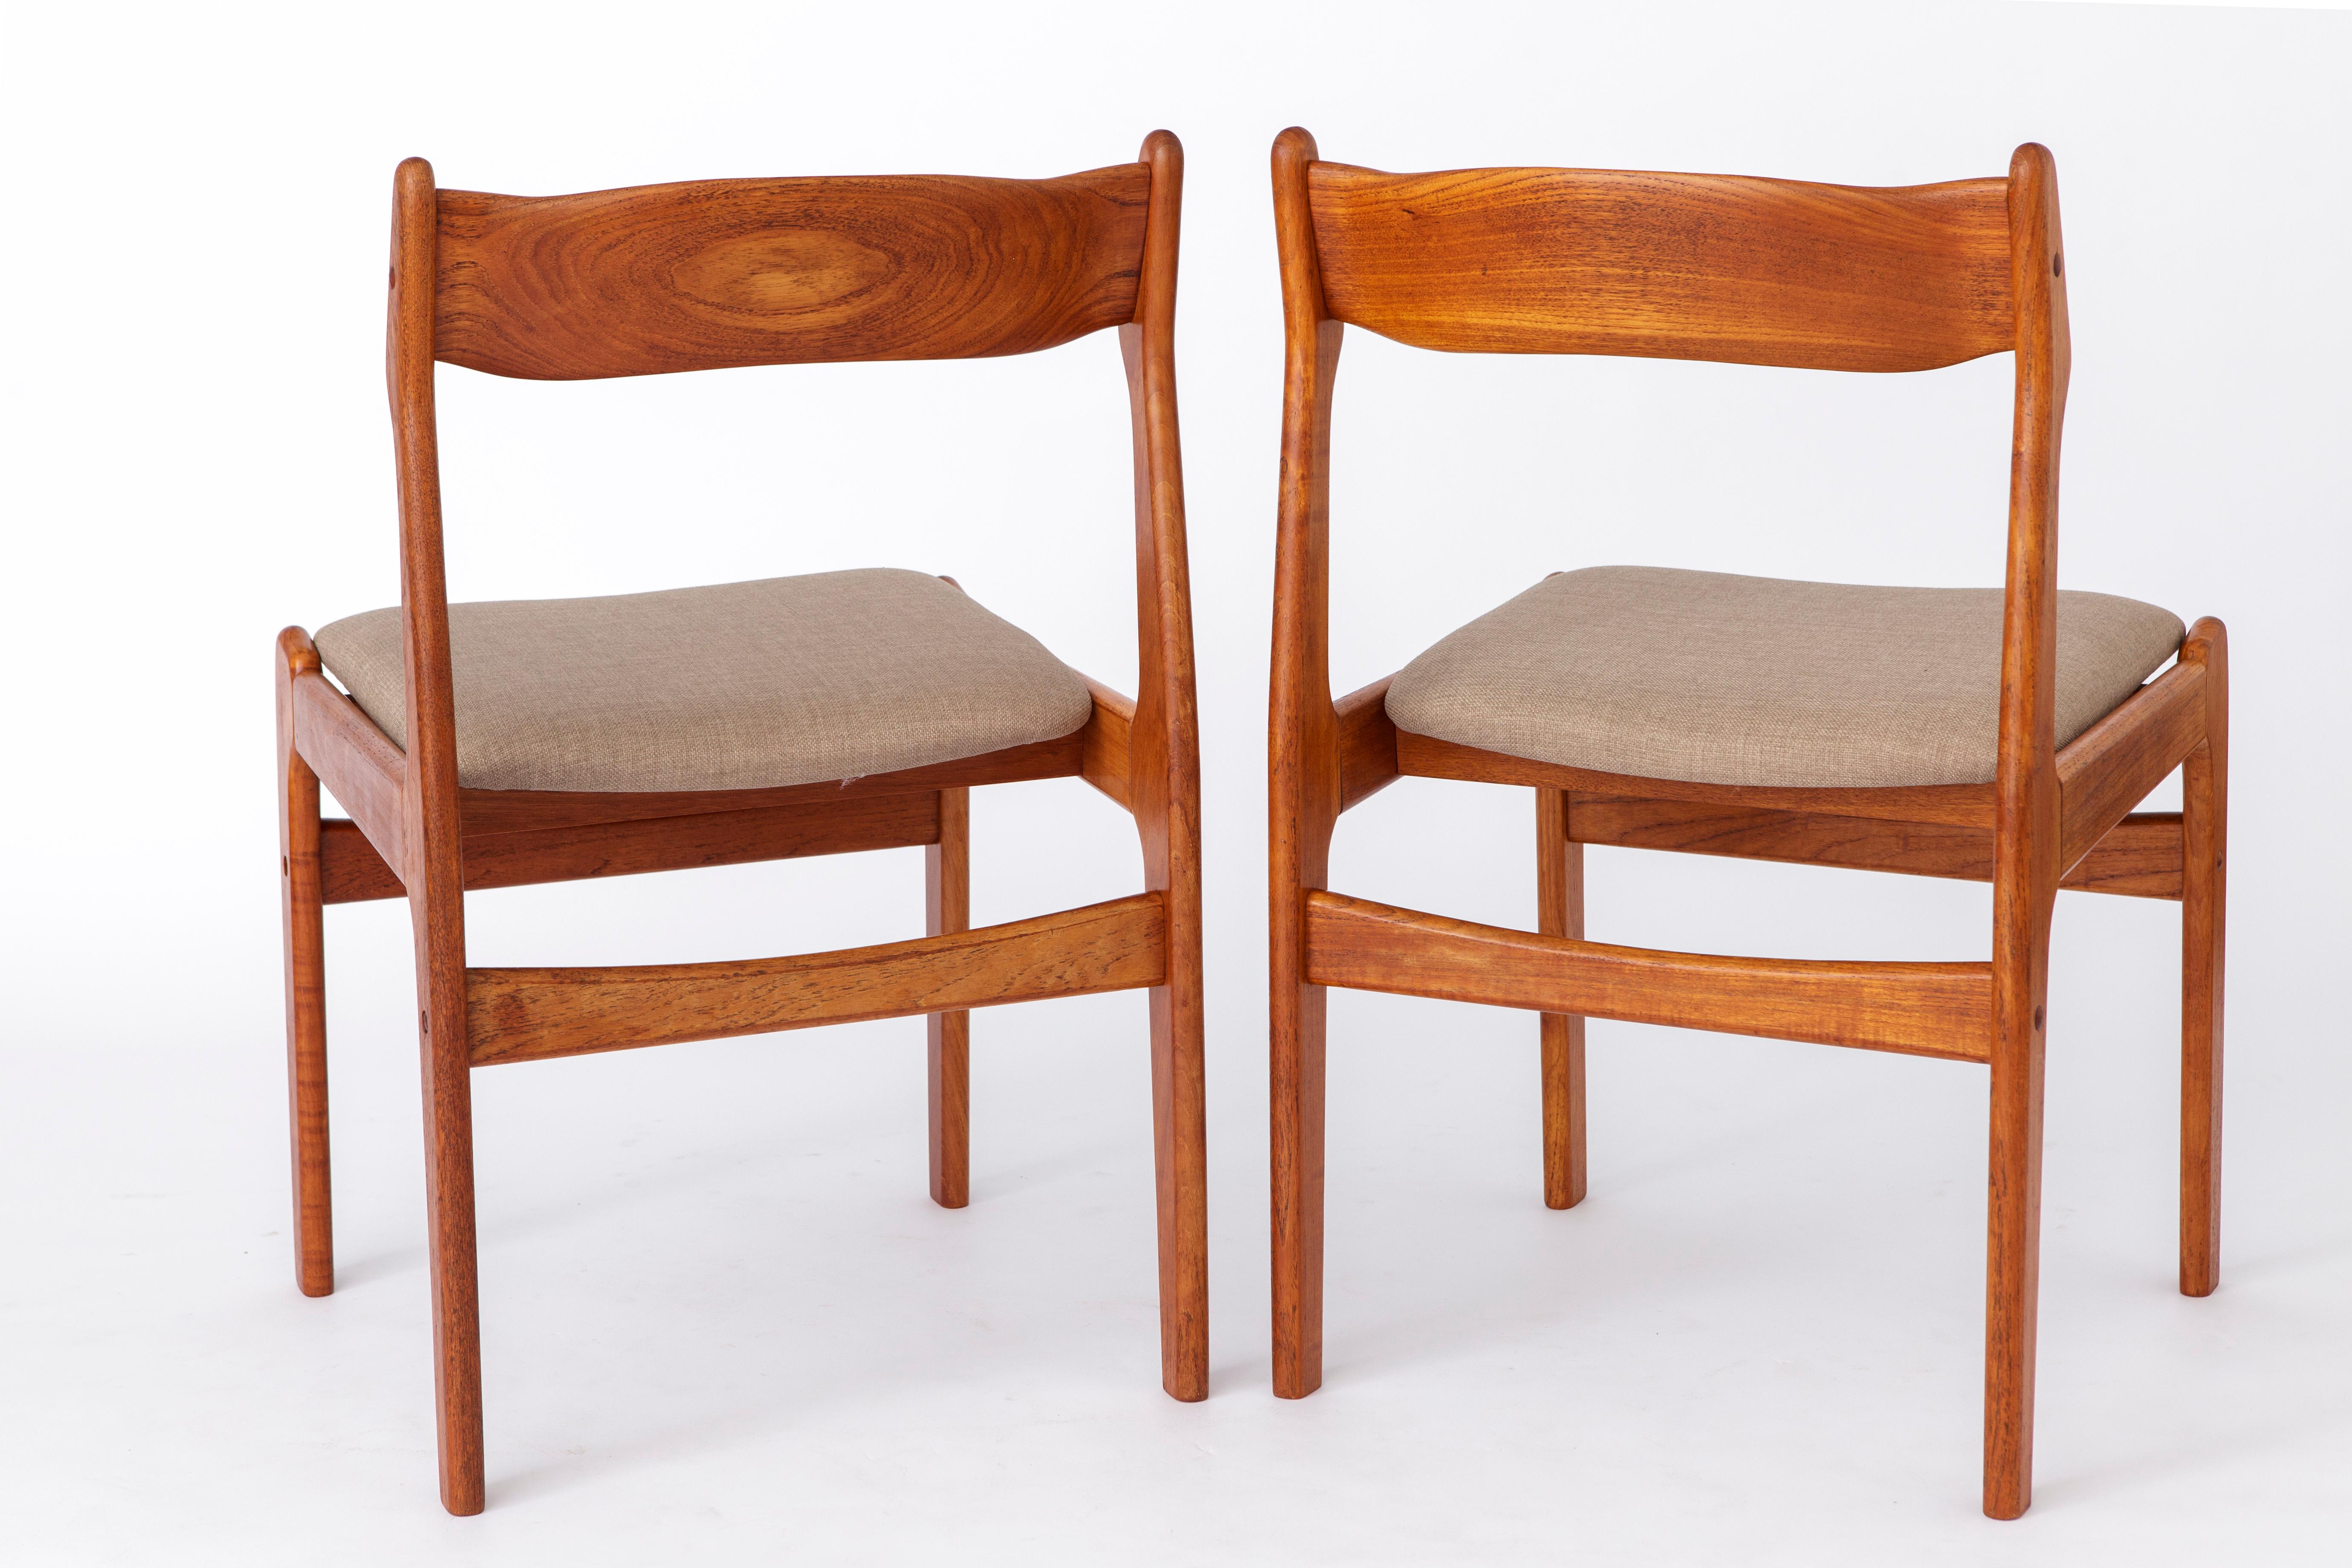 Teak 2 of 5 Vintage Danish Chairs 1960s - Walnut Chair Frame For Sale